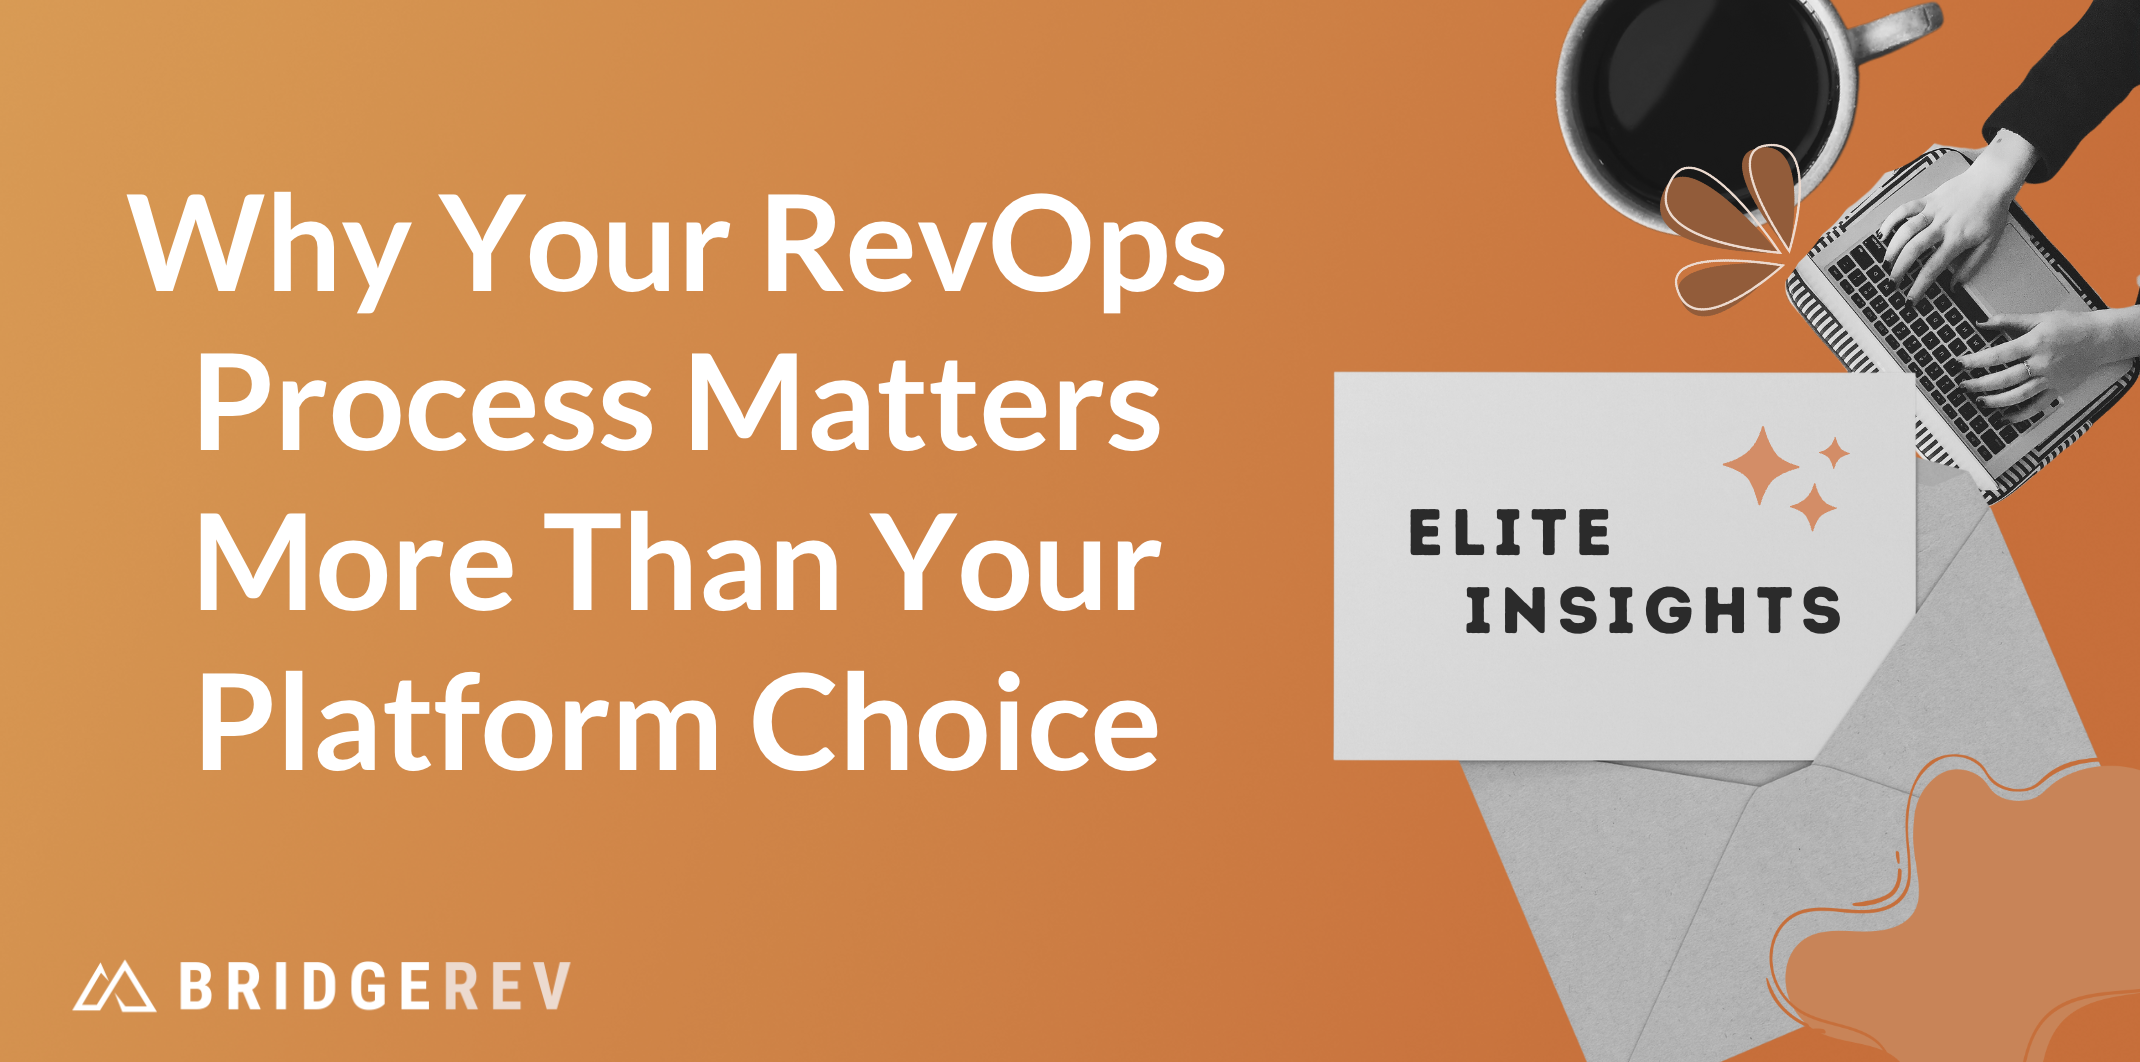 Why Your RevOps Process Matters More Than Your Platform